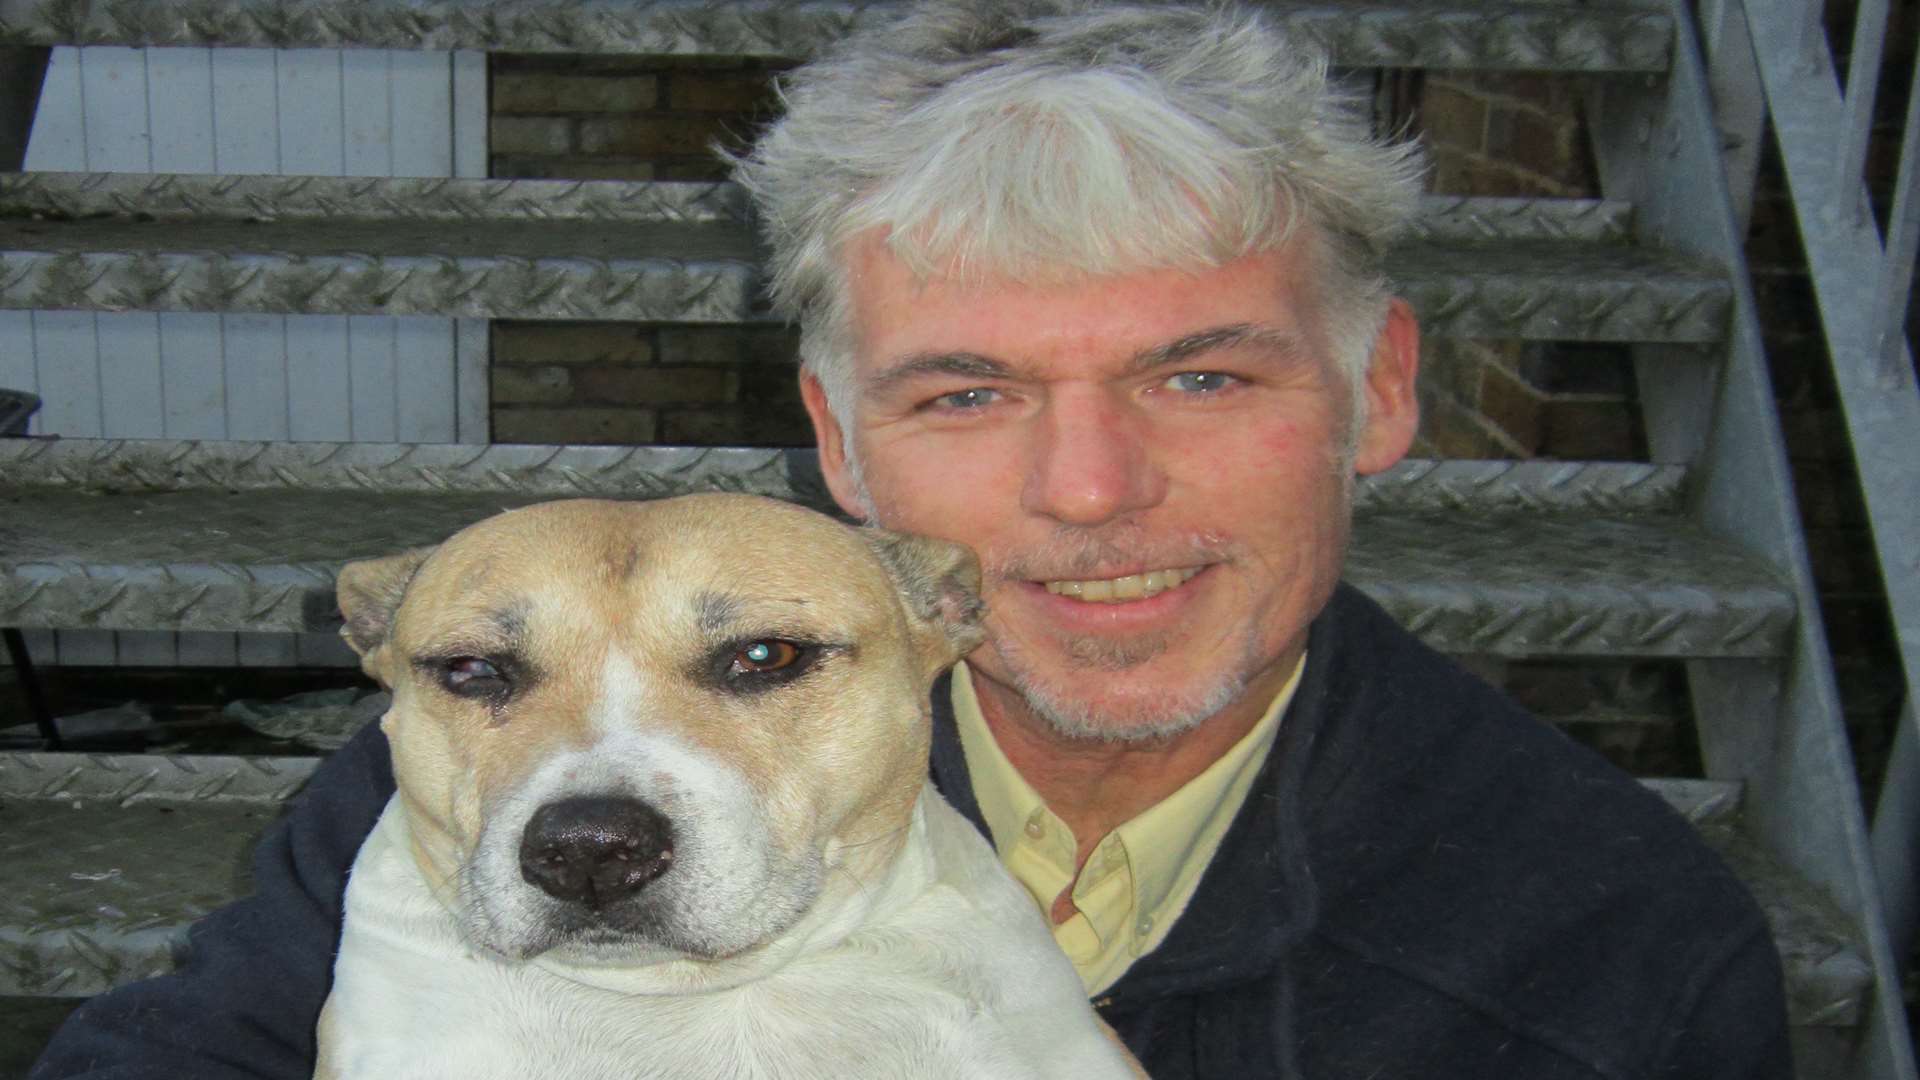 Glenn Hall, pictured with another dog